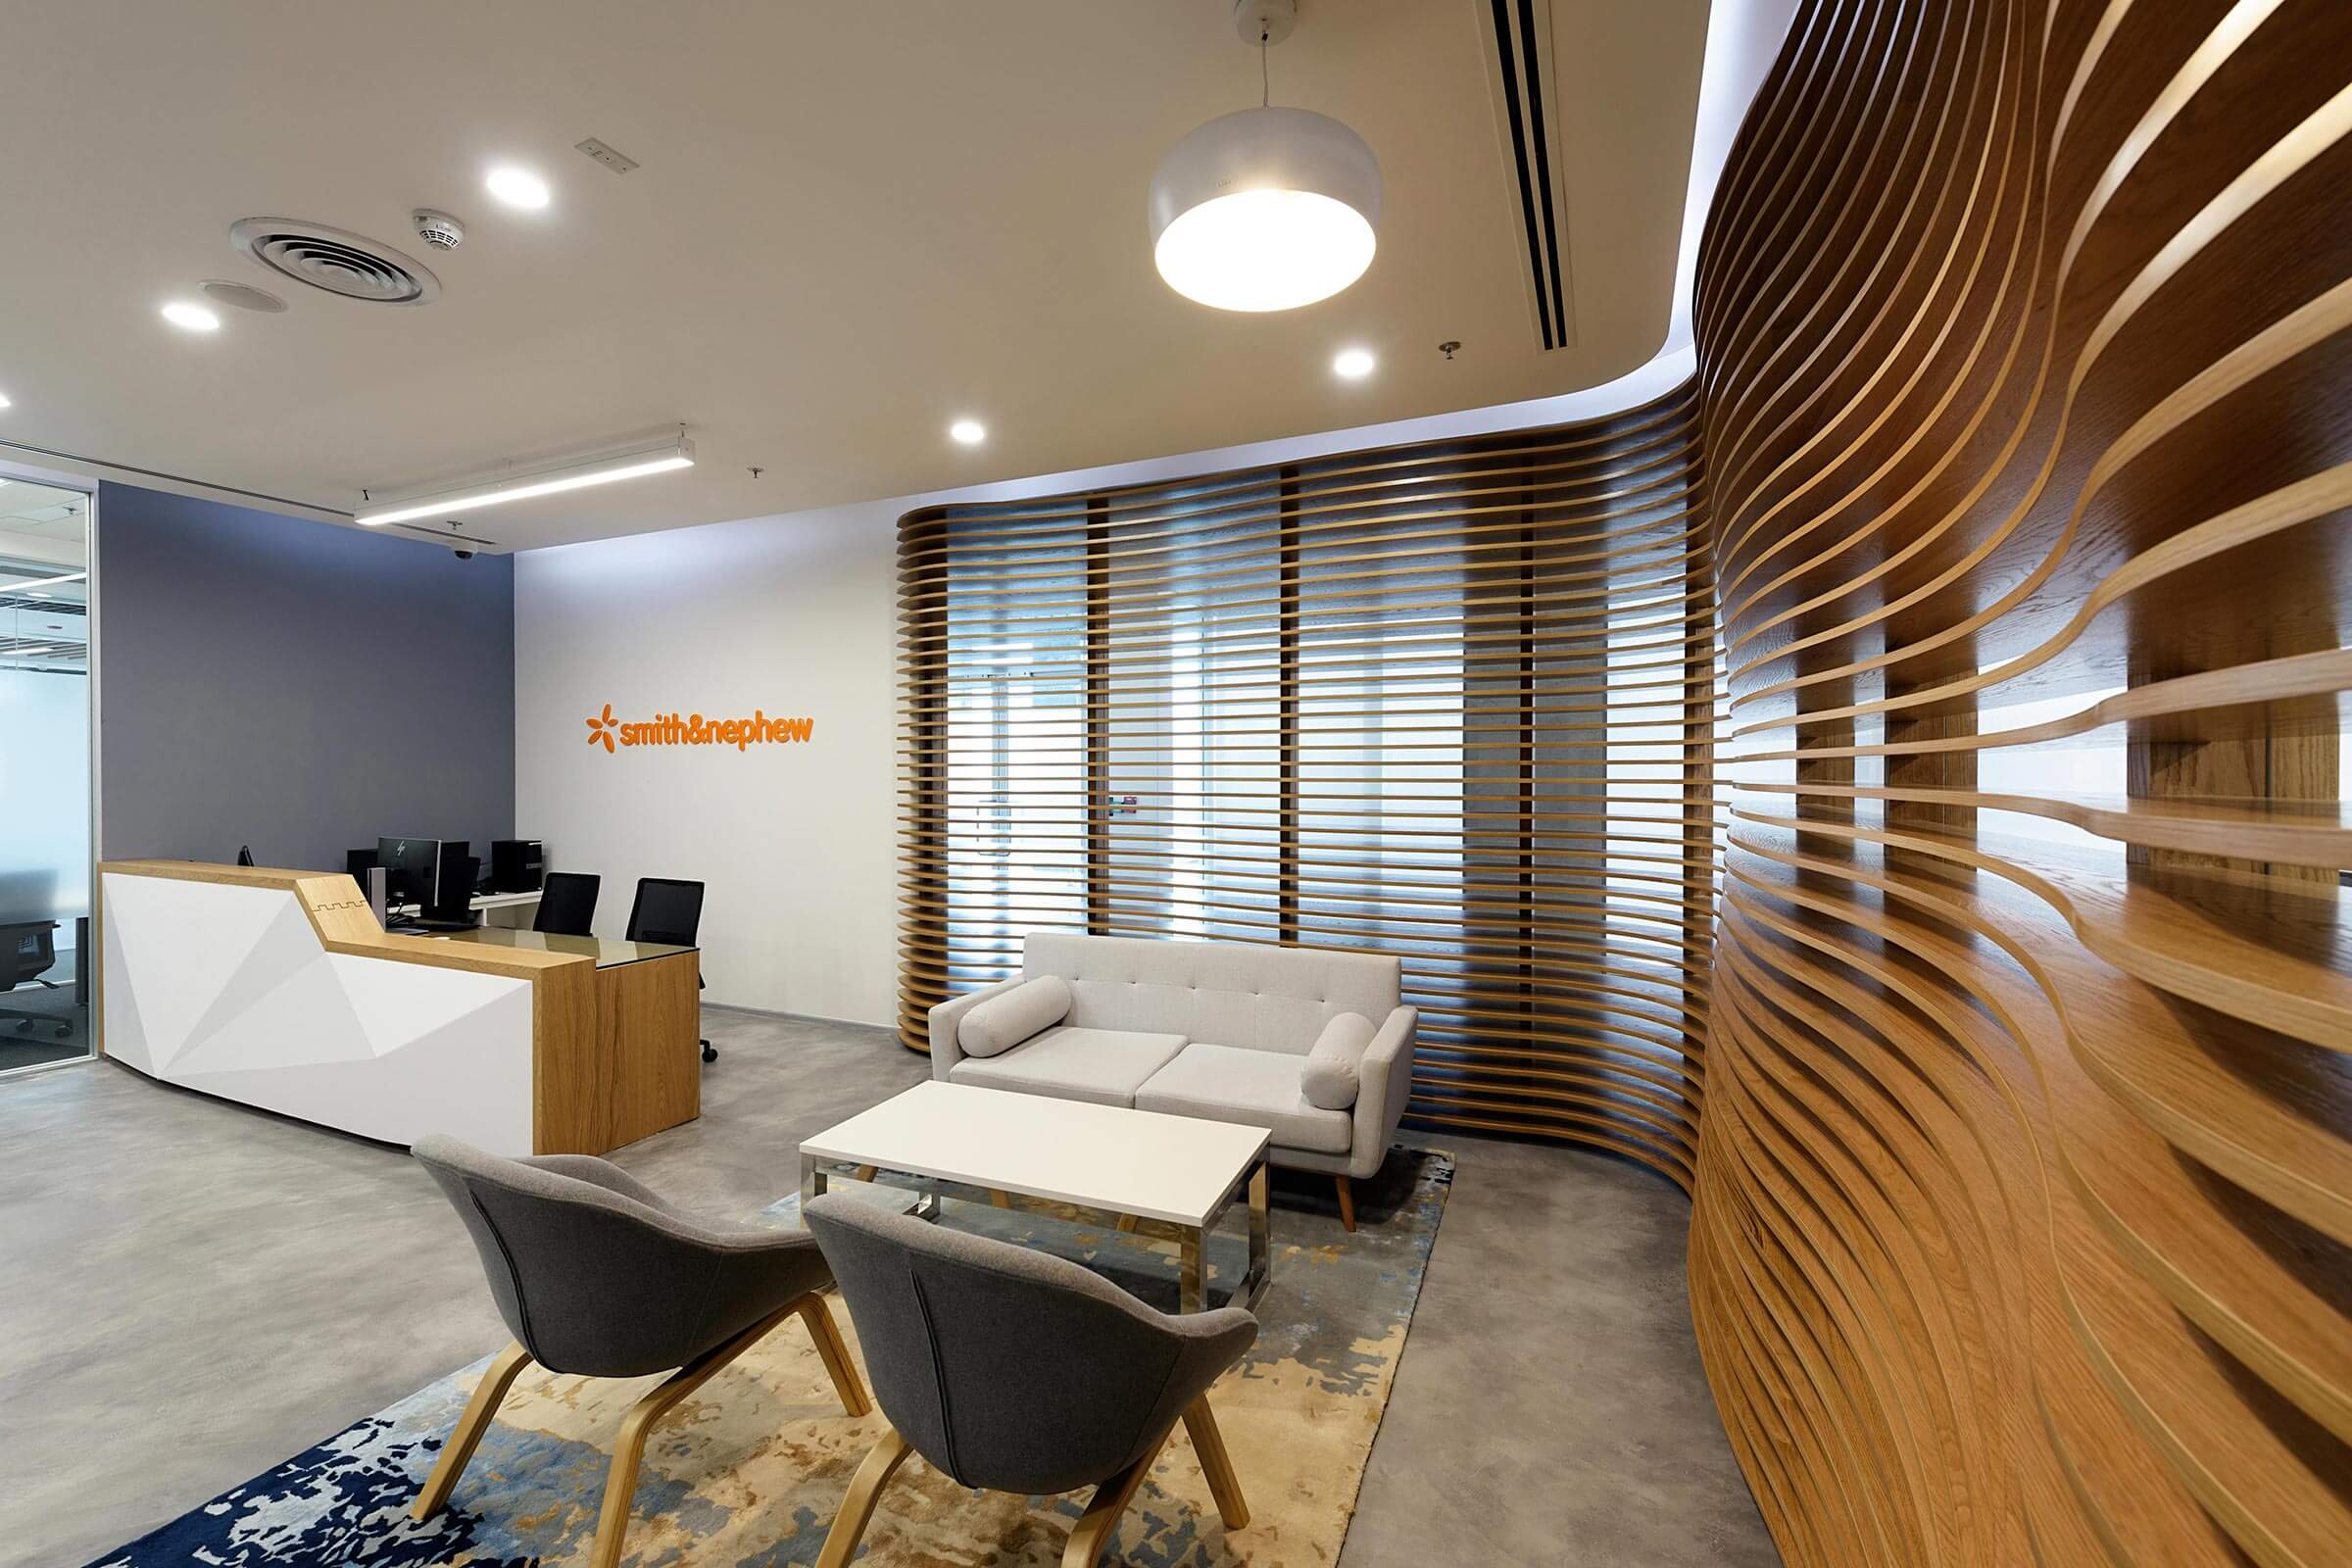 DWP Featured Project Smith & Nephew at pune